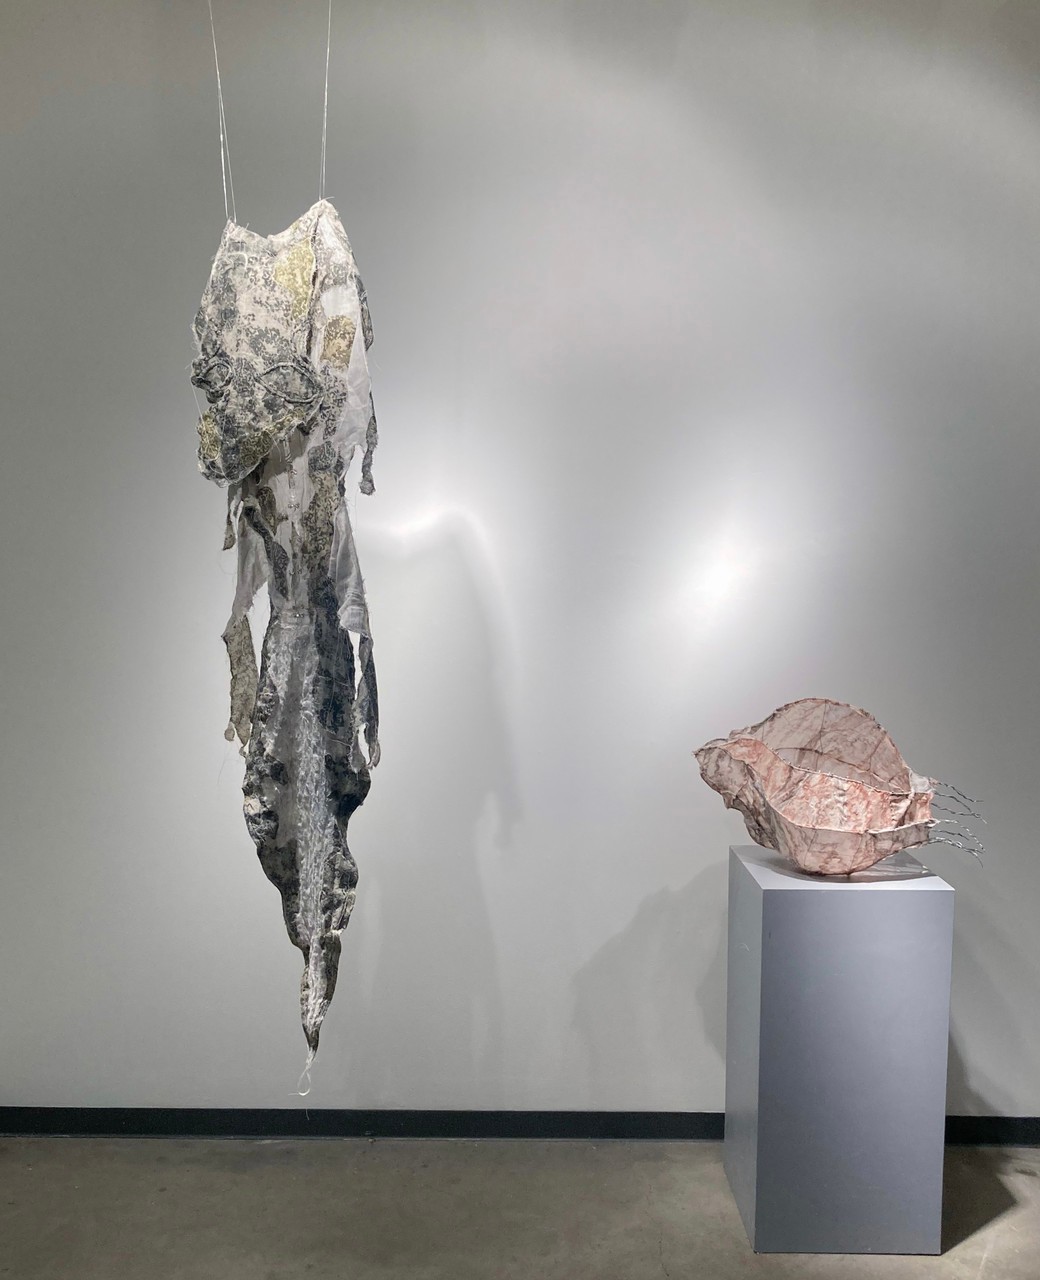 Installation view of the piece this was home which includes a peached colored rendering of a mollusk shell made out of metal wire and cheesecloth, as well as a green textile suit imitating shed lizard skin.    